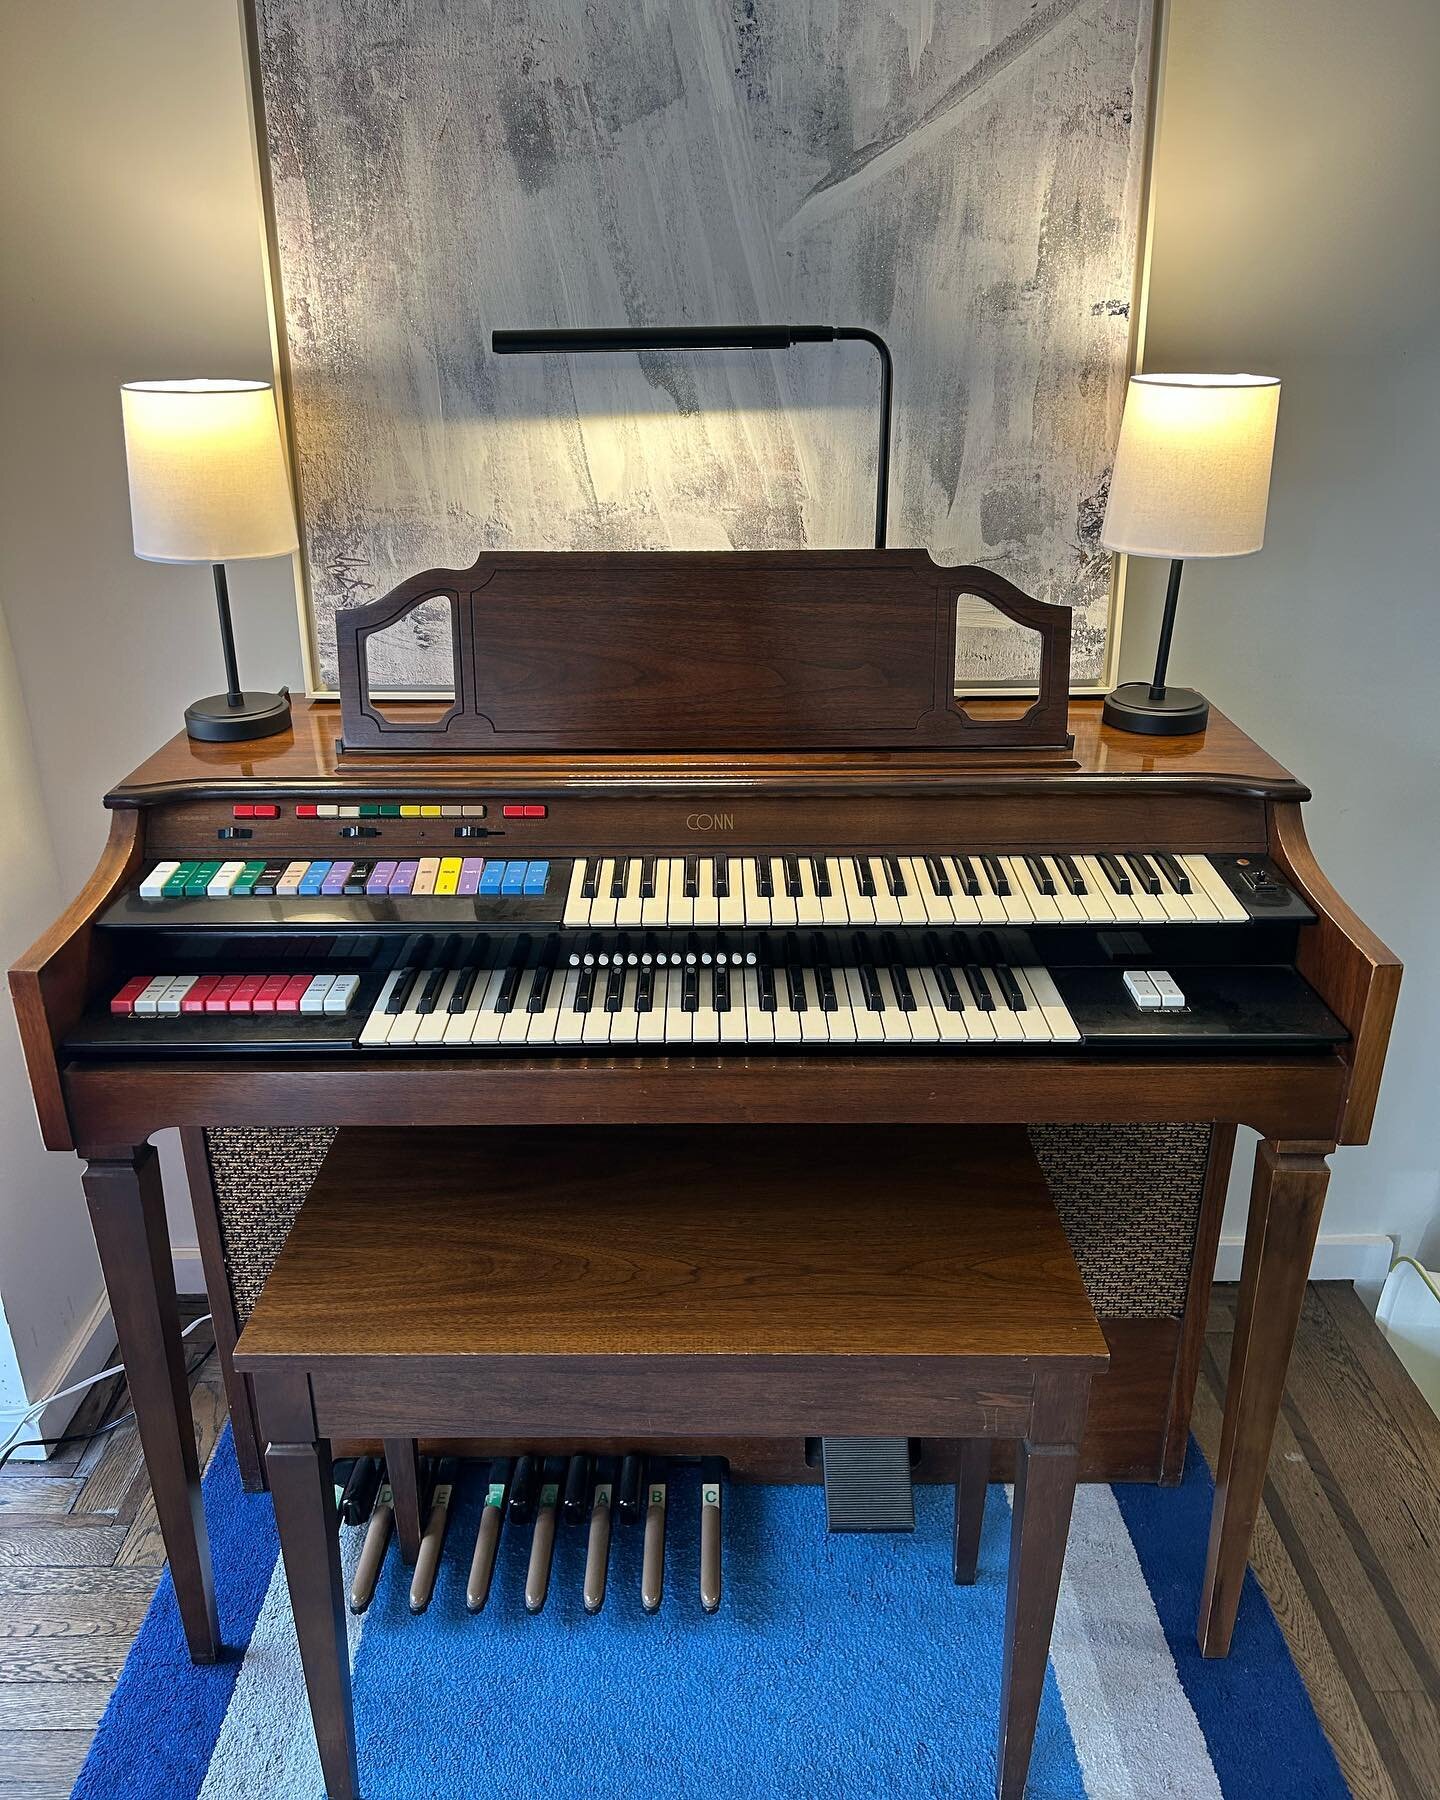 We are so excited to feature our newest instrument in our storefront window!  Thank you to our generous donors and friends who made the actual move to the studio possible #premier #music #studio #organ #fun #pedals #buttons #keys